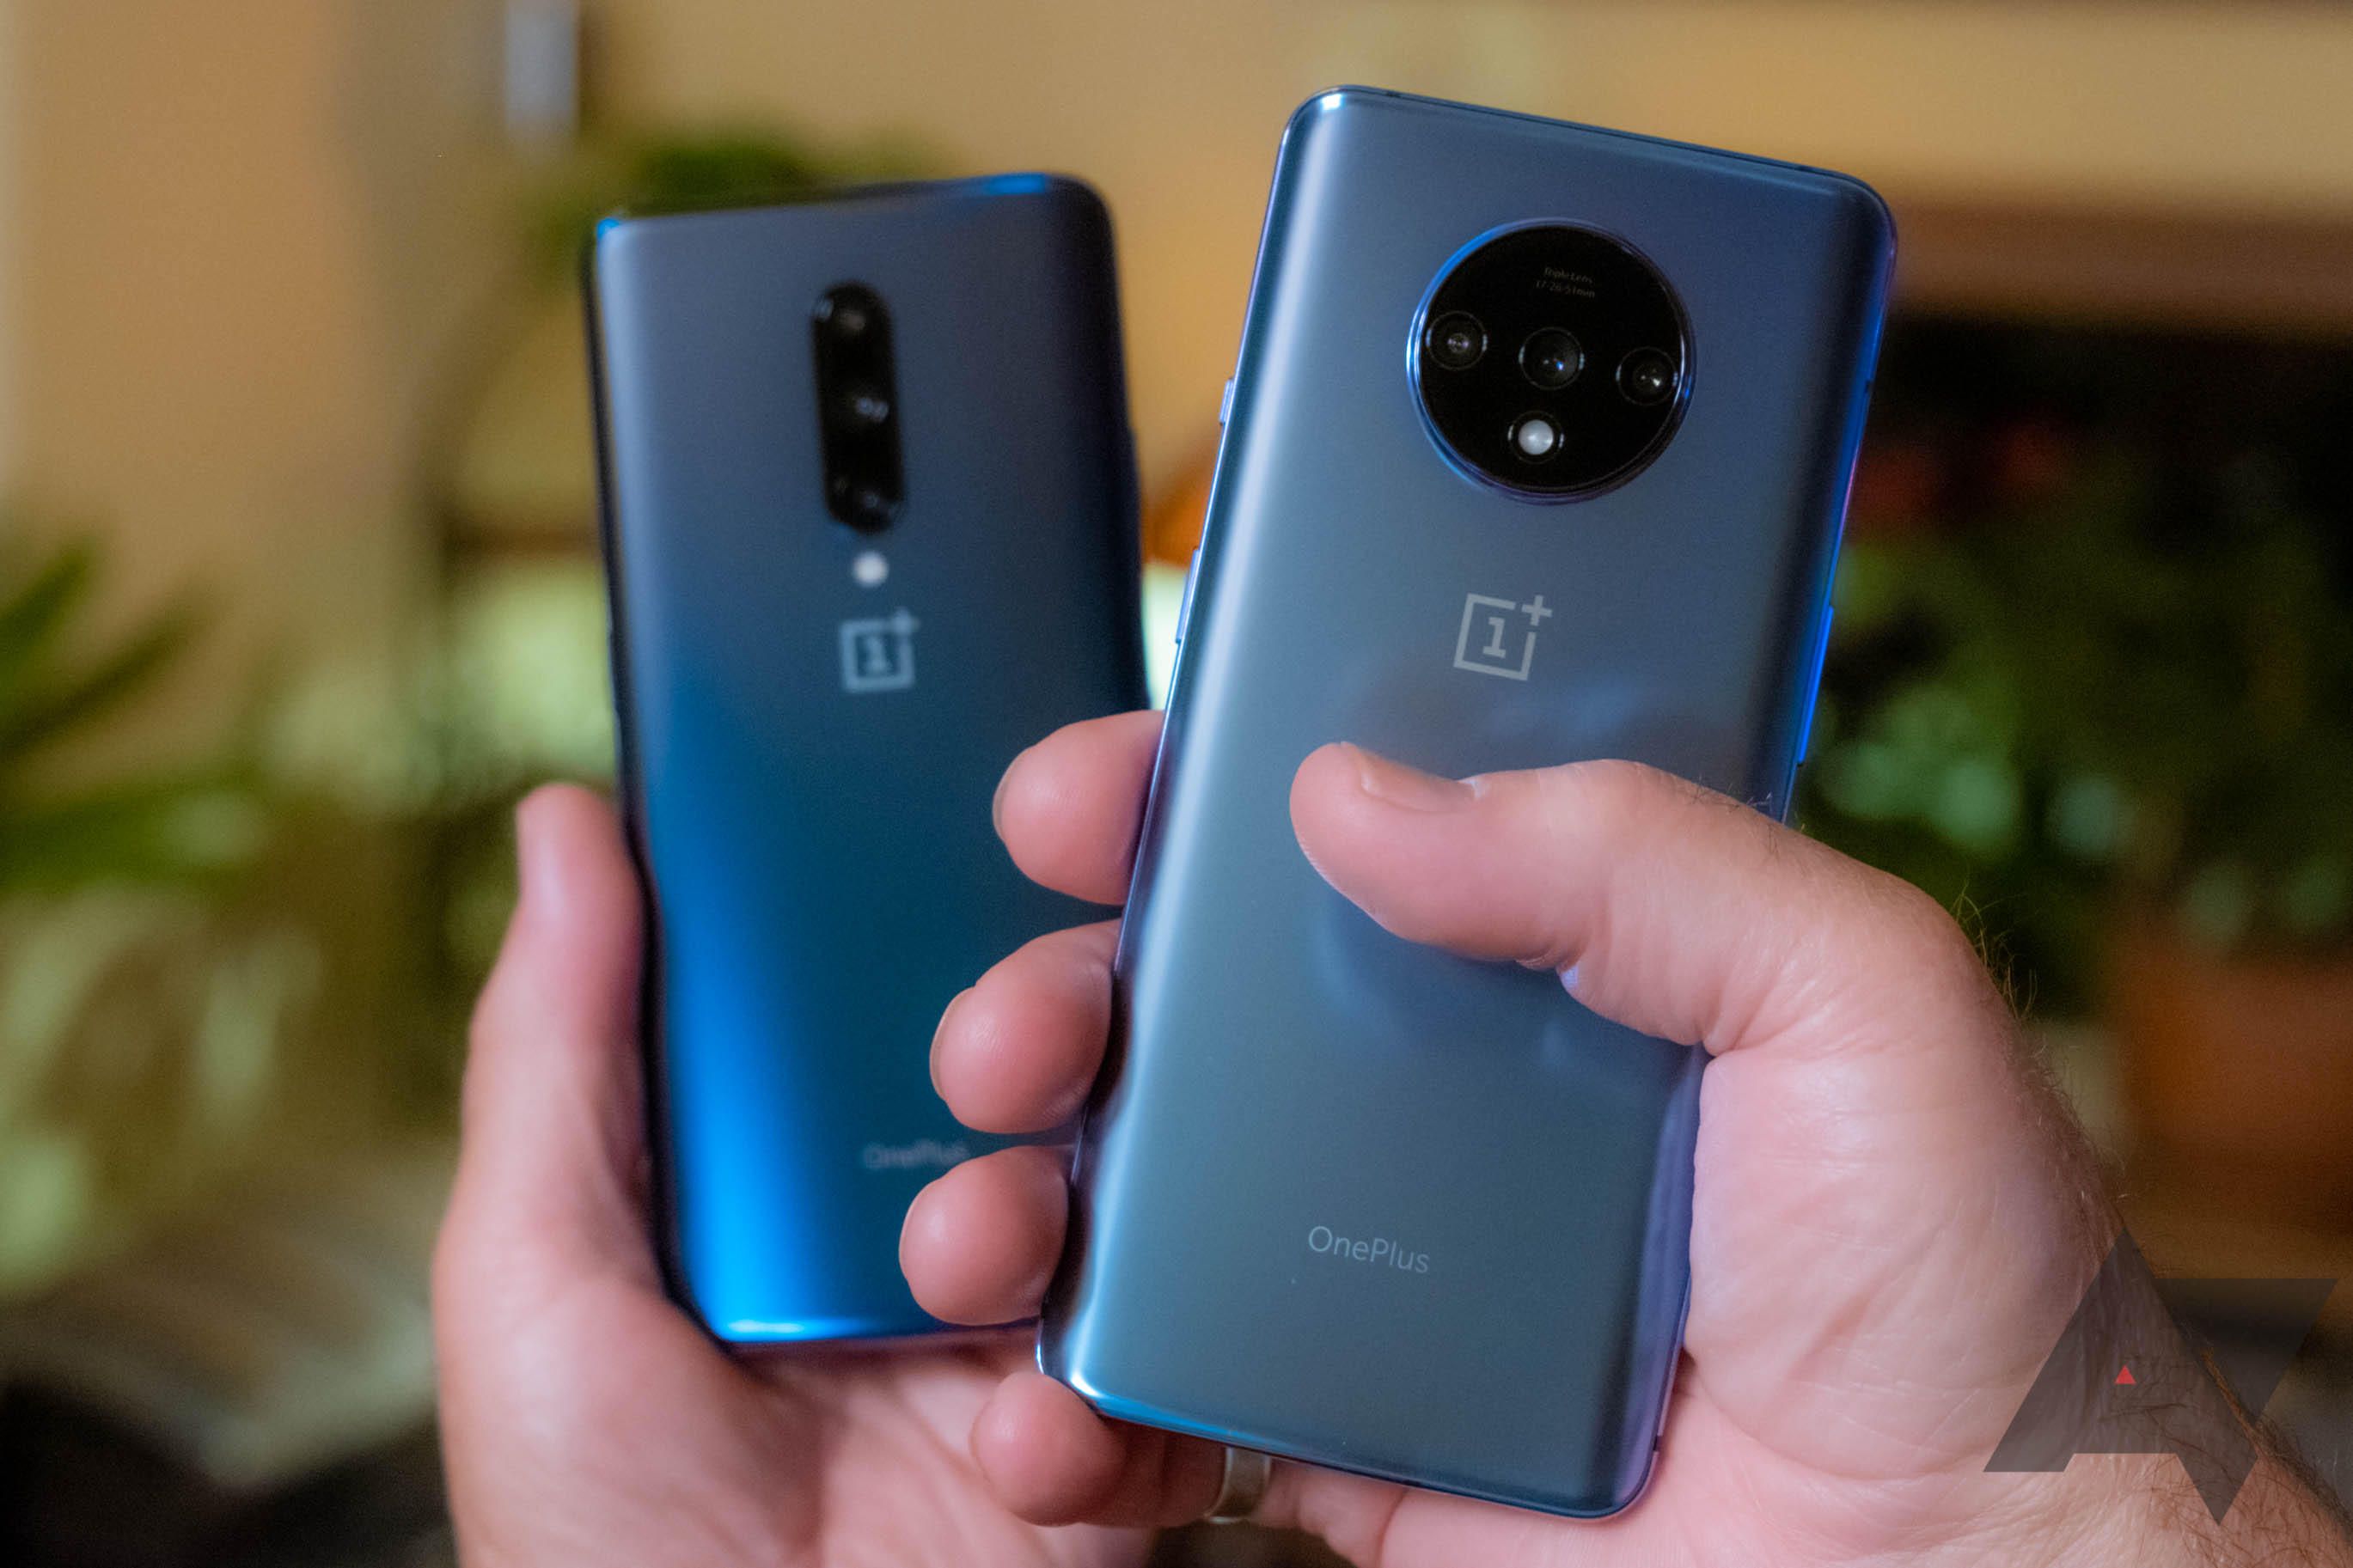 OnePlus 7T with 7 Pro in hands